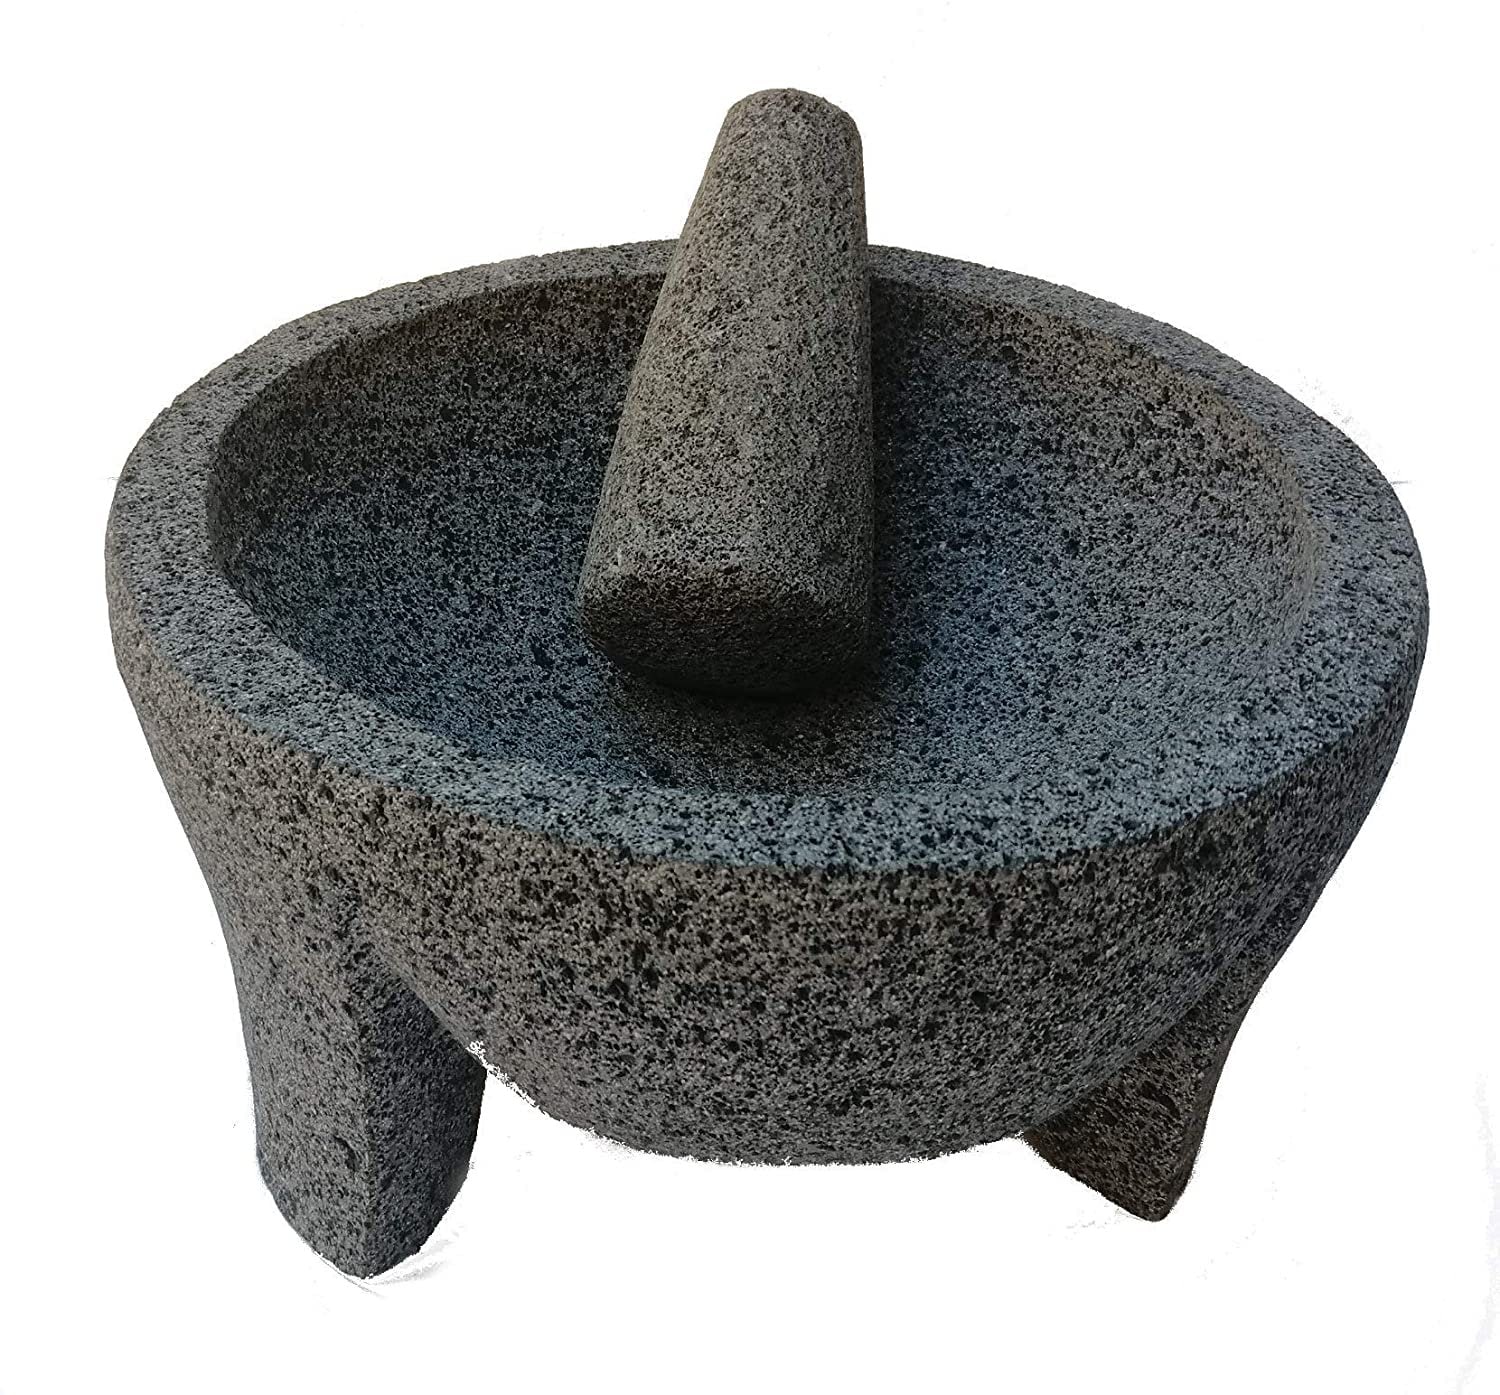 Mortar and Pestle Set - 6 Inch Granite, Large Molcajete Bowl with Stone  Grinder